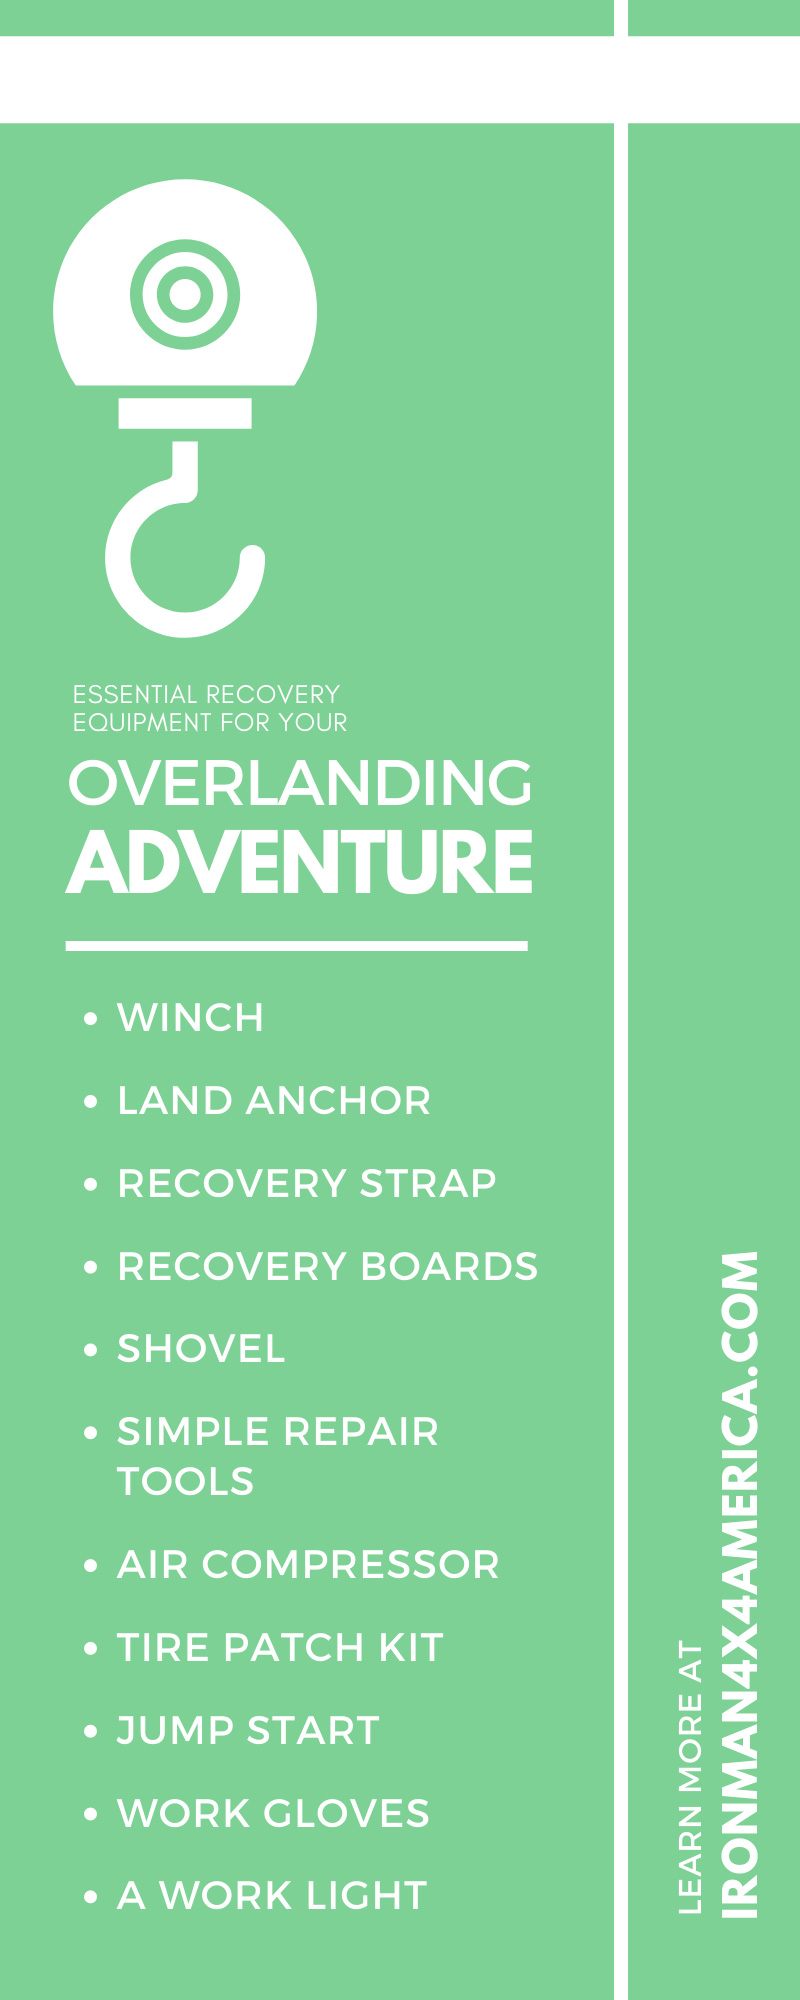 Essential Recovery Equipment for Your Overlanding Adventure